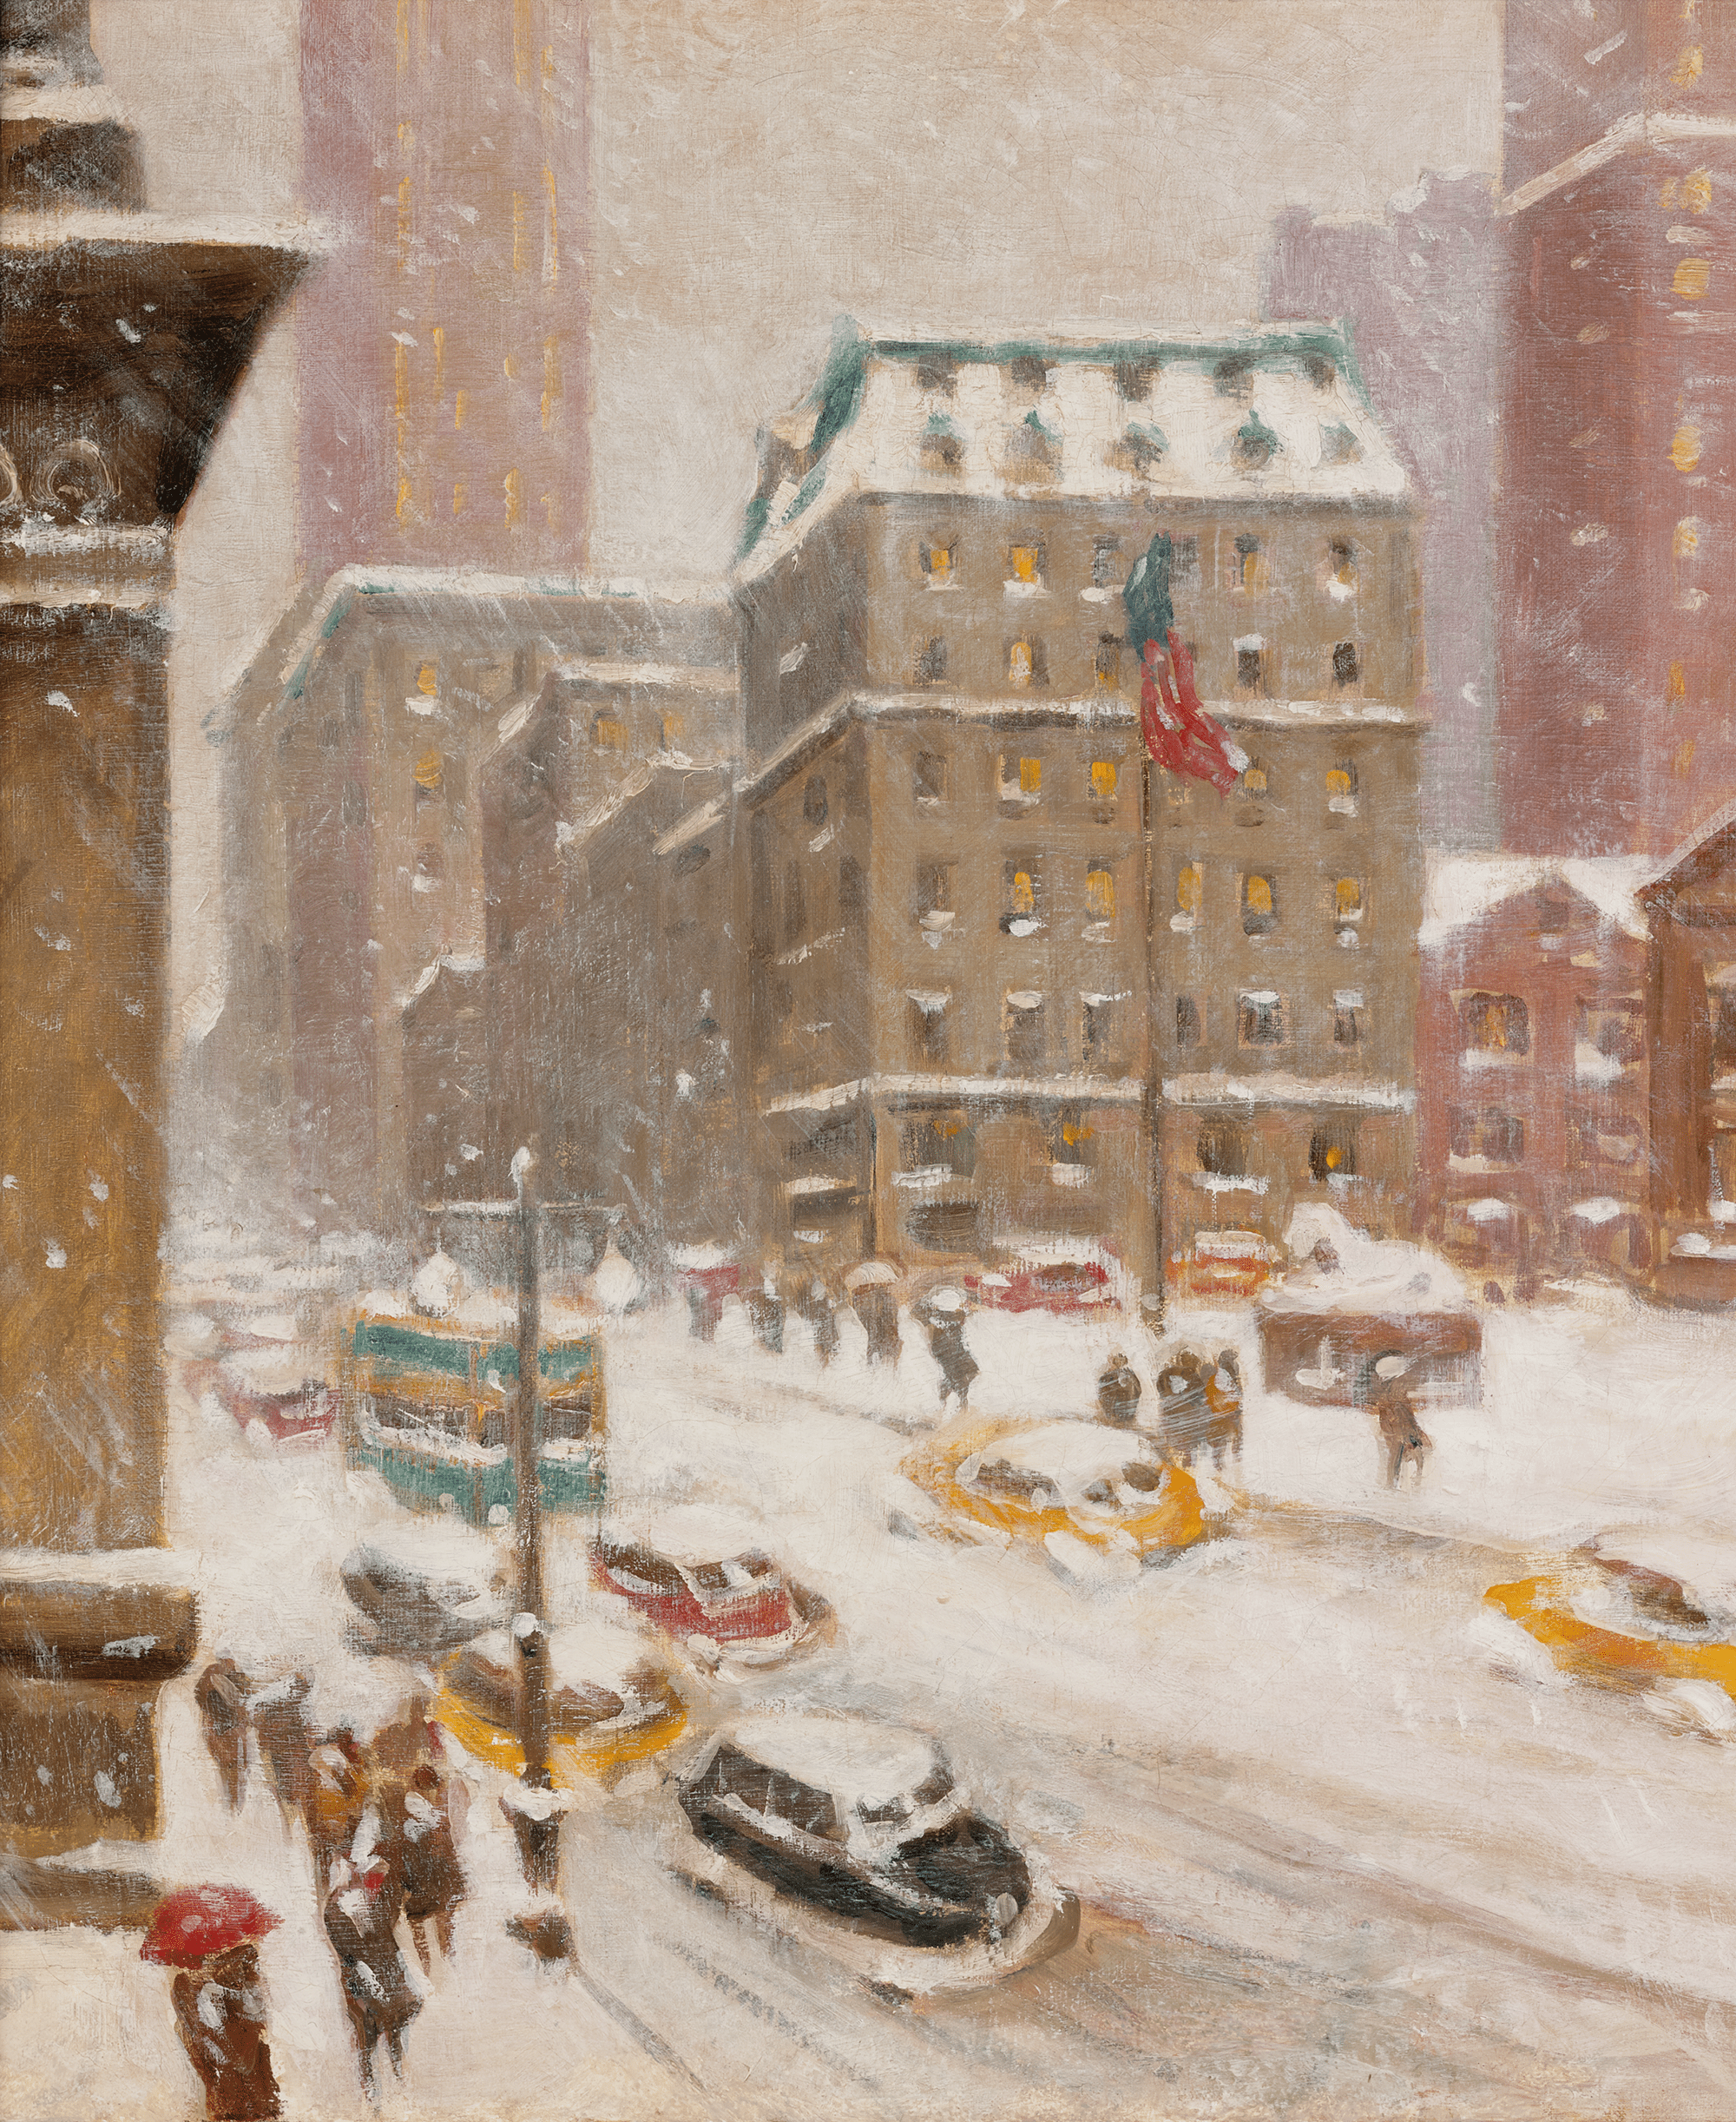 5th Avenue Storm at 42nd Street by Guy Carleton Wiggins